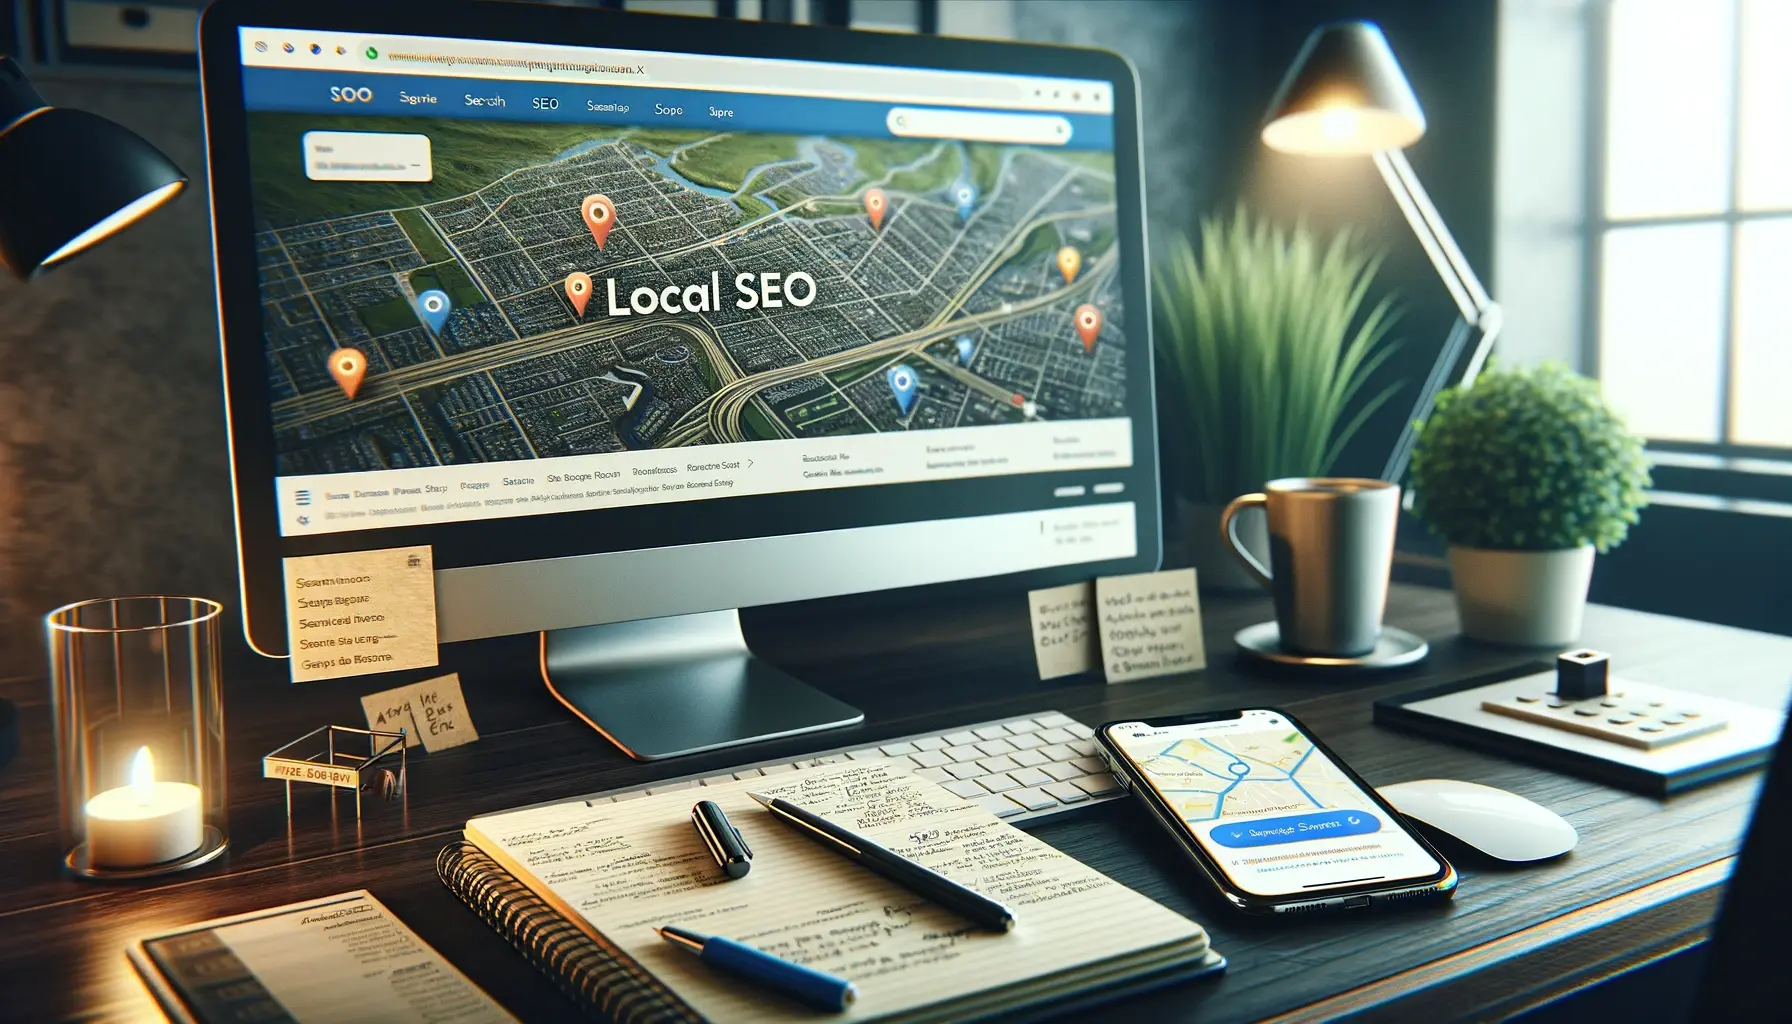 DALL·E 2023 11 21 16.33.28 A hyperrealistic photographic style image representing the theme Local SEO in a 16 9 aspect ratio. The image should depict a modern workspace with